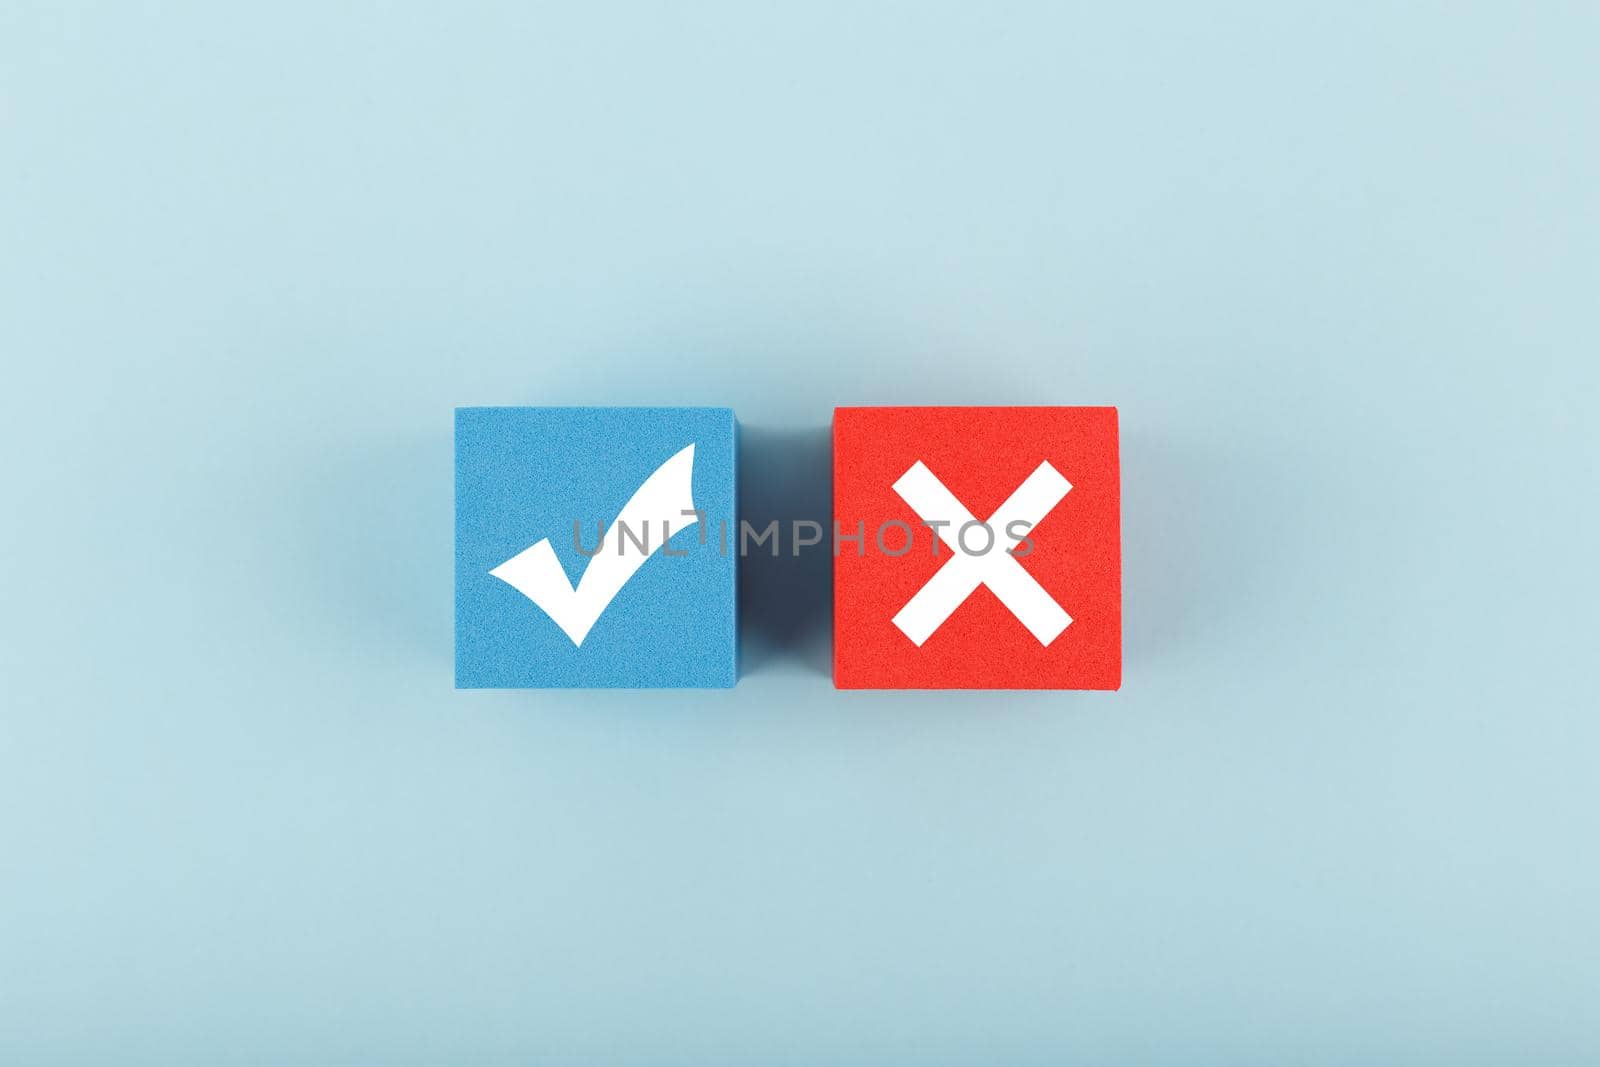 True and false symbol on blue and red cubes against bright pastel blue background. Concept of accept and reject, true or false, right or wrong